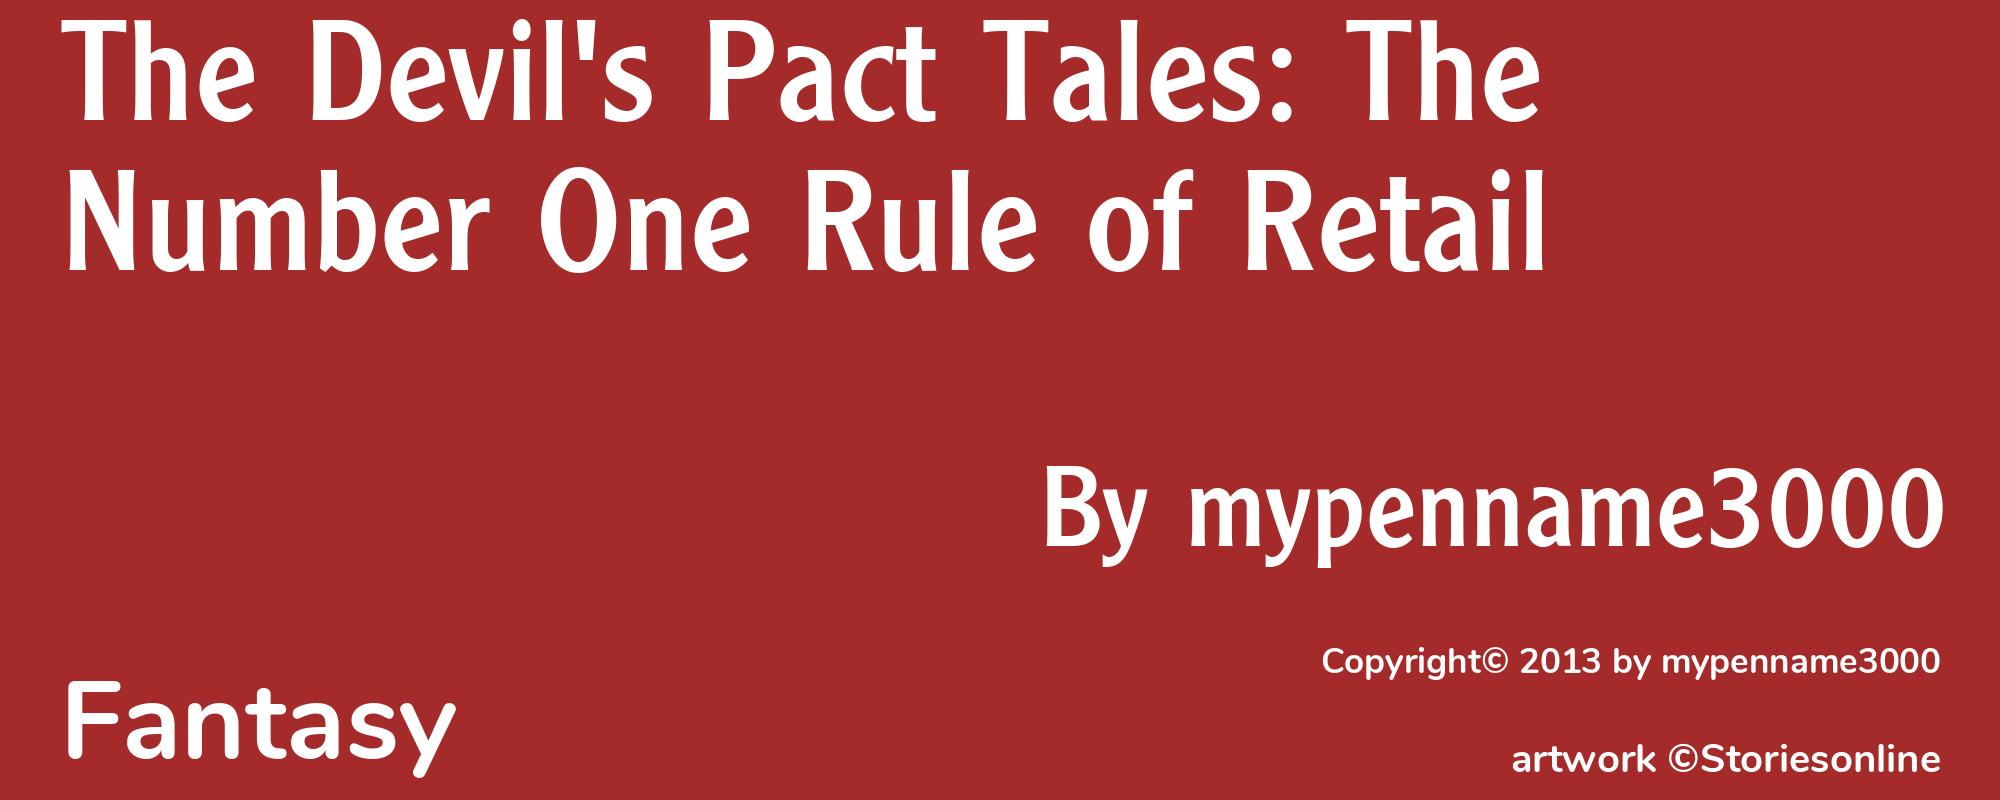 The Devil's Pact Tales: The Number One Rule of Retail - Cover